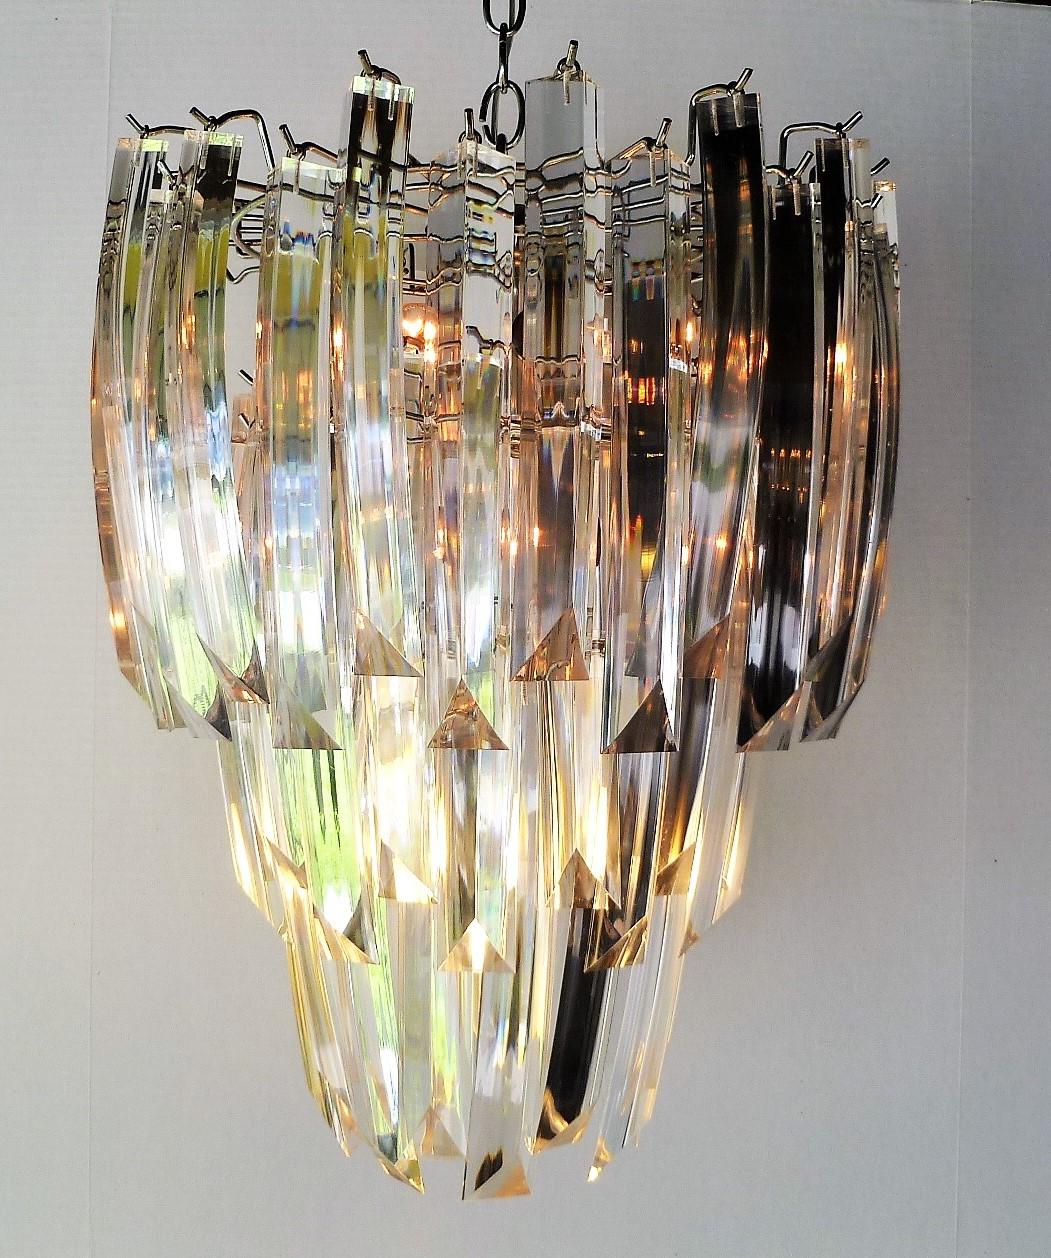 Elegant midcentury three-tier Lucite chandelier form the early 1970s. With a chromed metal frame and three tiers of slightly curving Lucite crystals. A wonderful light source, it has nine chandelier light sockets. Very nice and clean